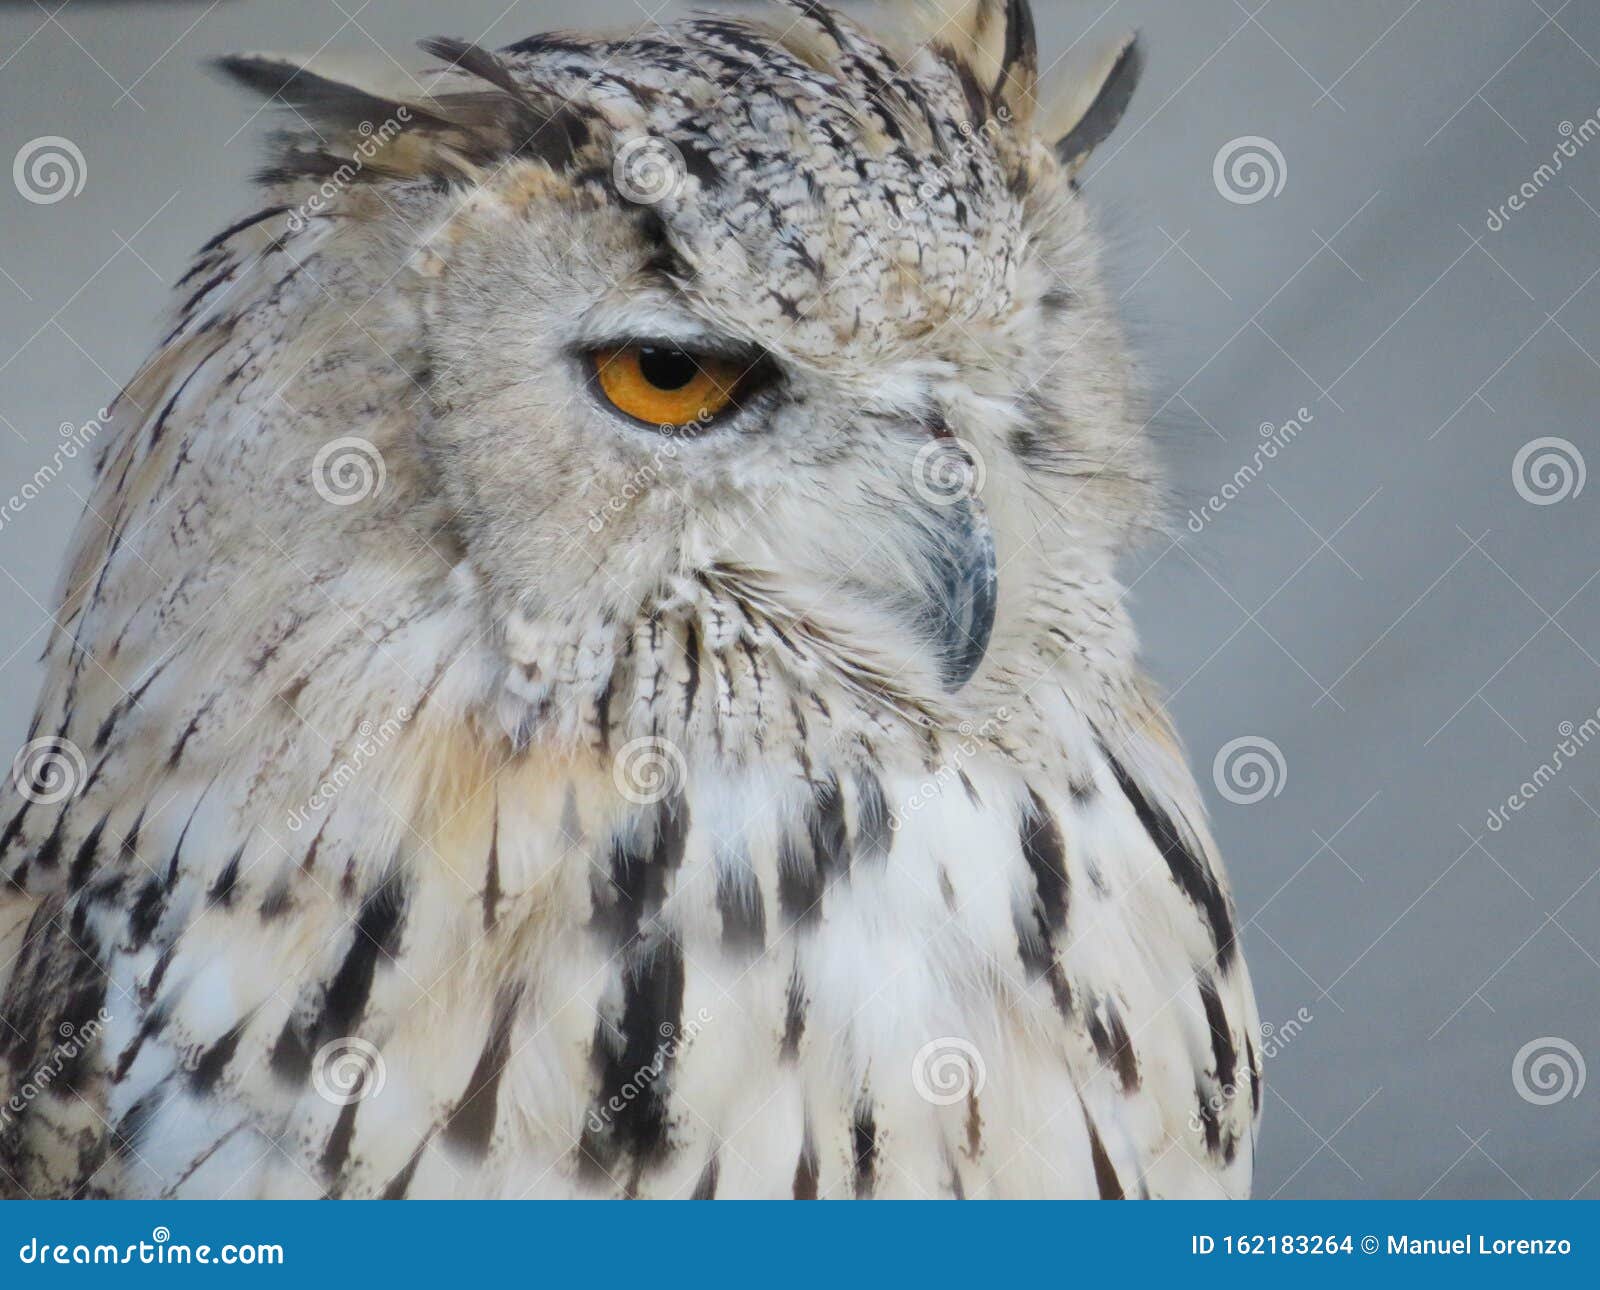 beautiful picture of birds of prey of great size and penetrating stare